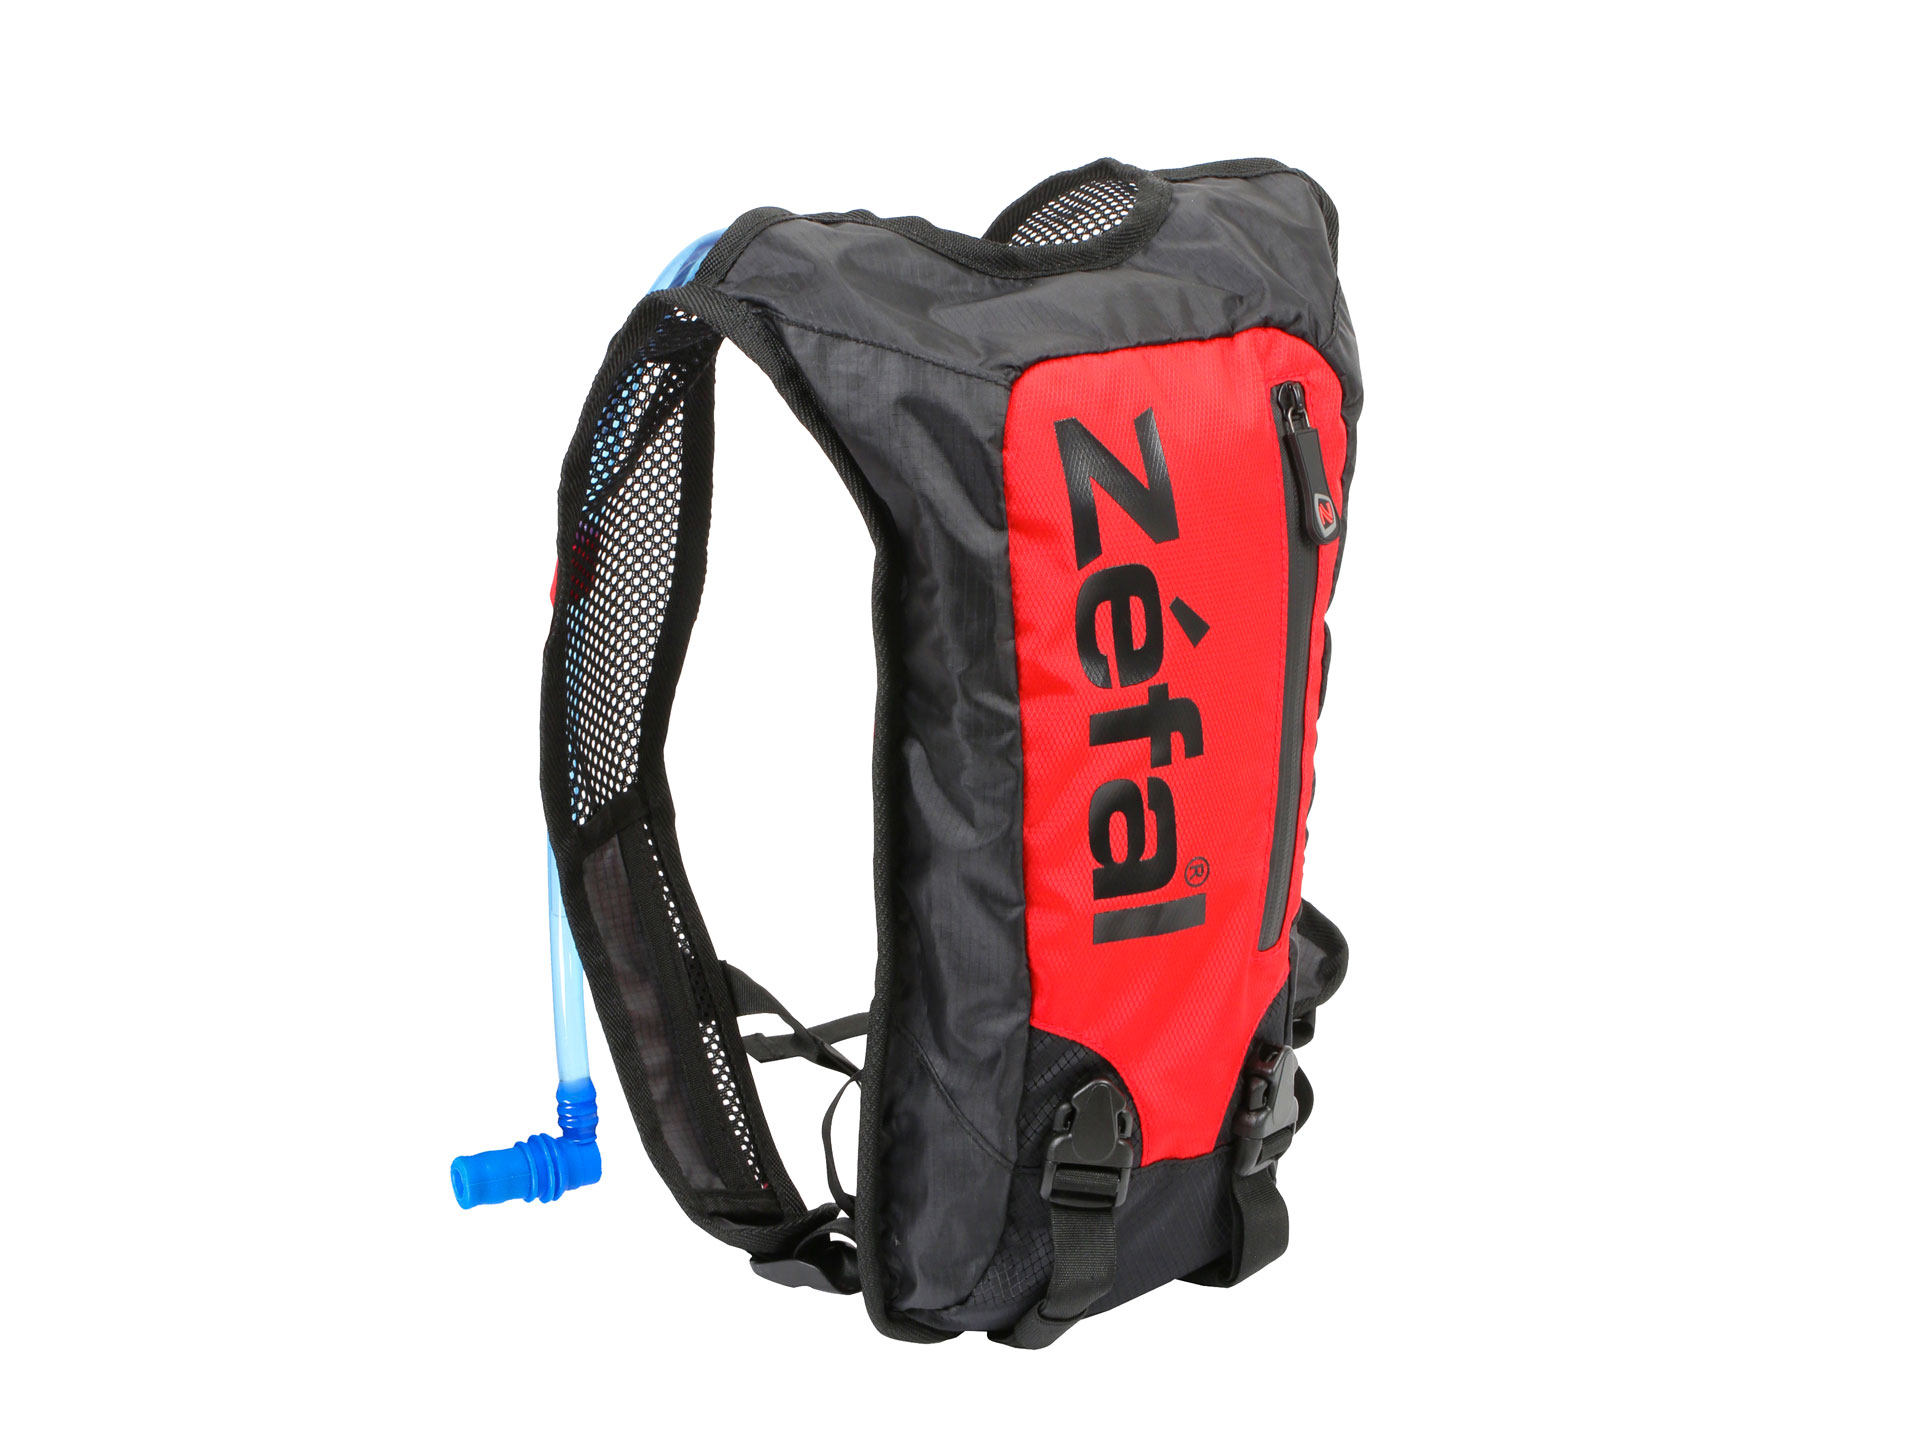 Zefal Z Hydro Race Sport Backpack with Water Bladder 7162